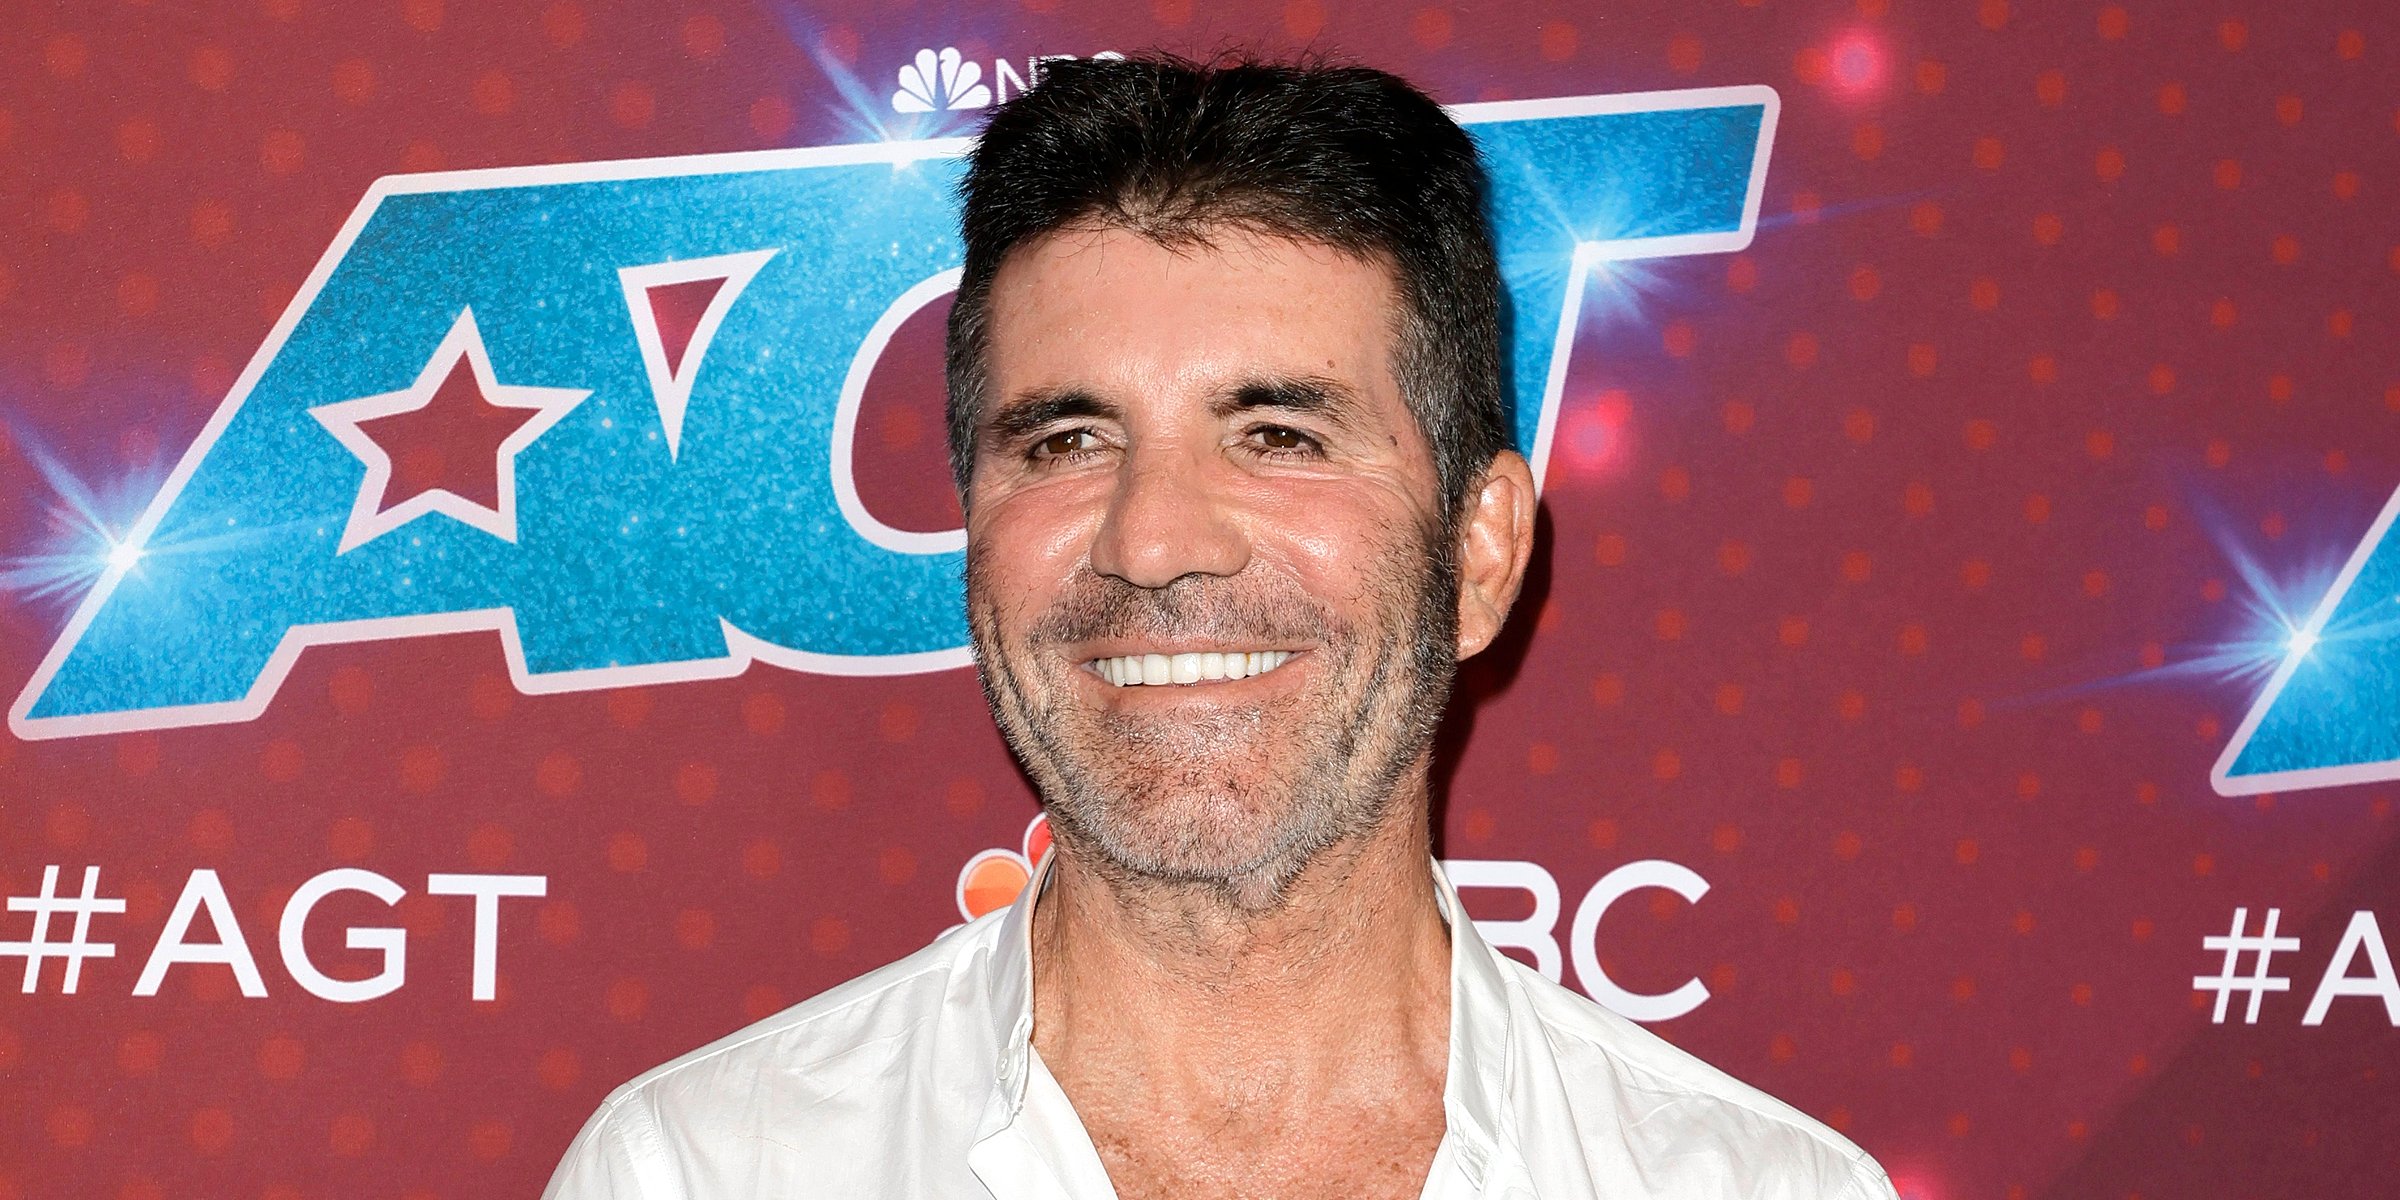 Simon Cowell | Source : Getty Images